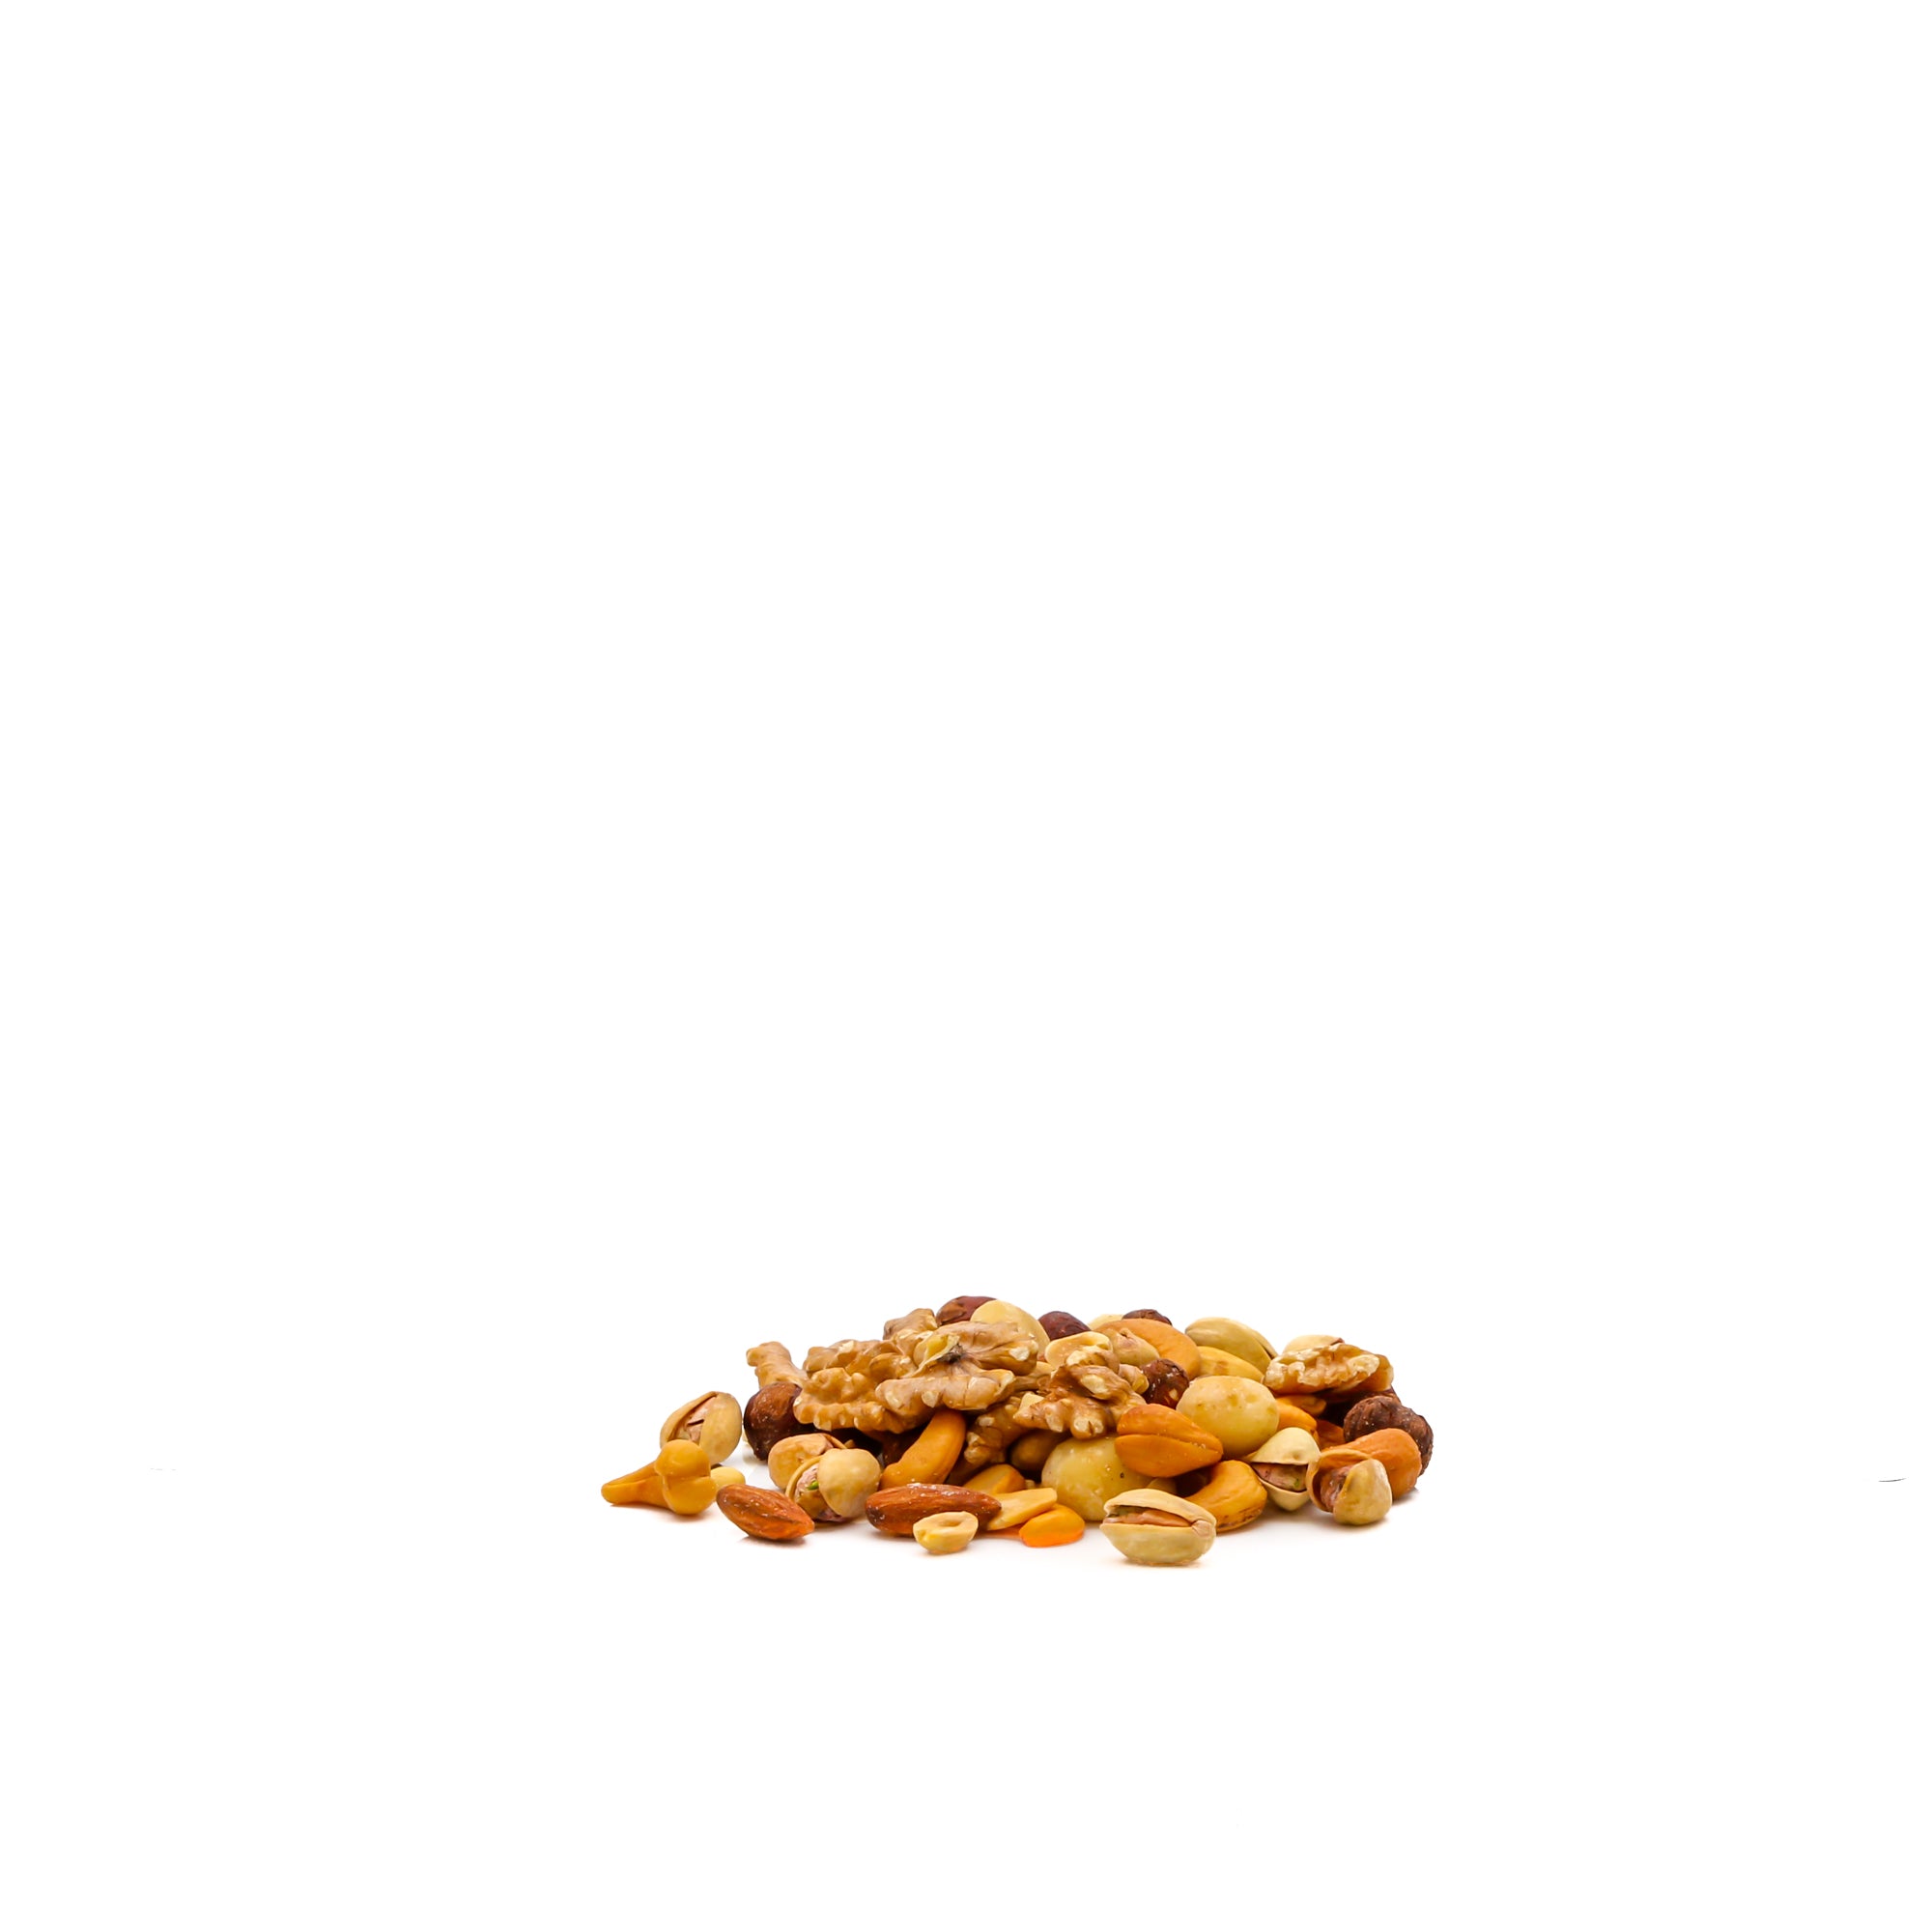 Roasted Salted Mixed Nuts (Beer Nuts)